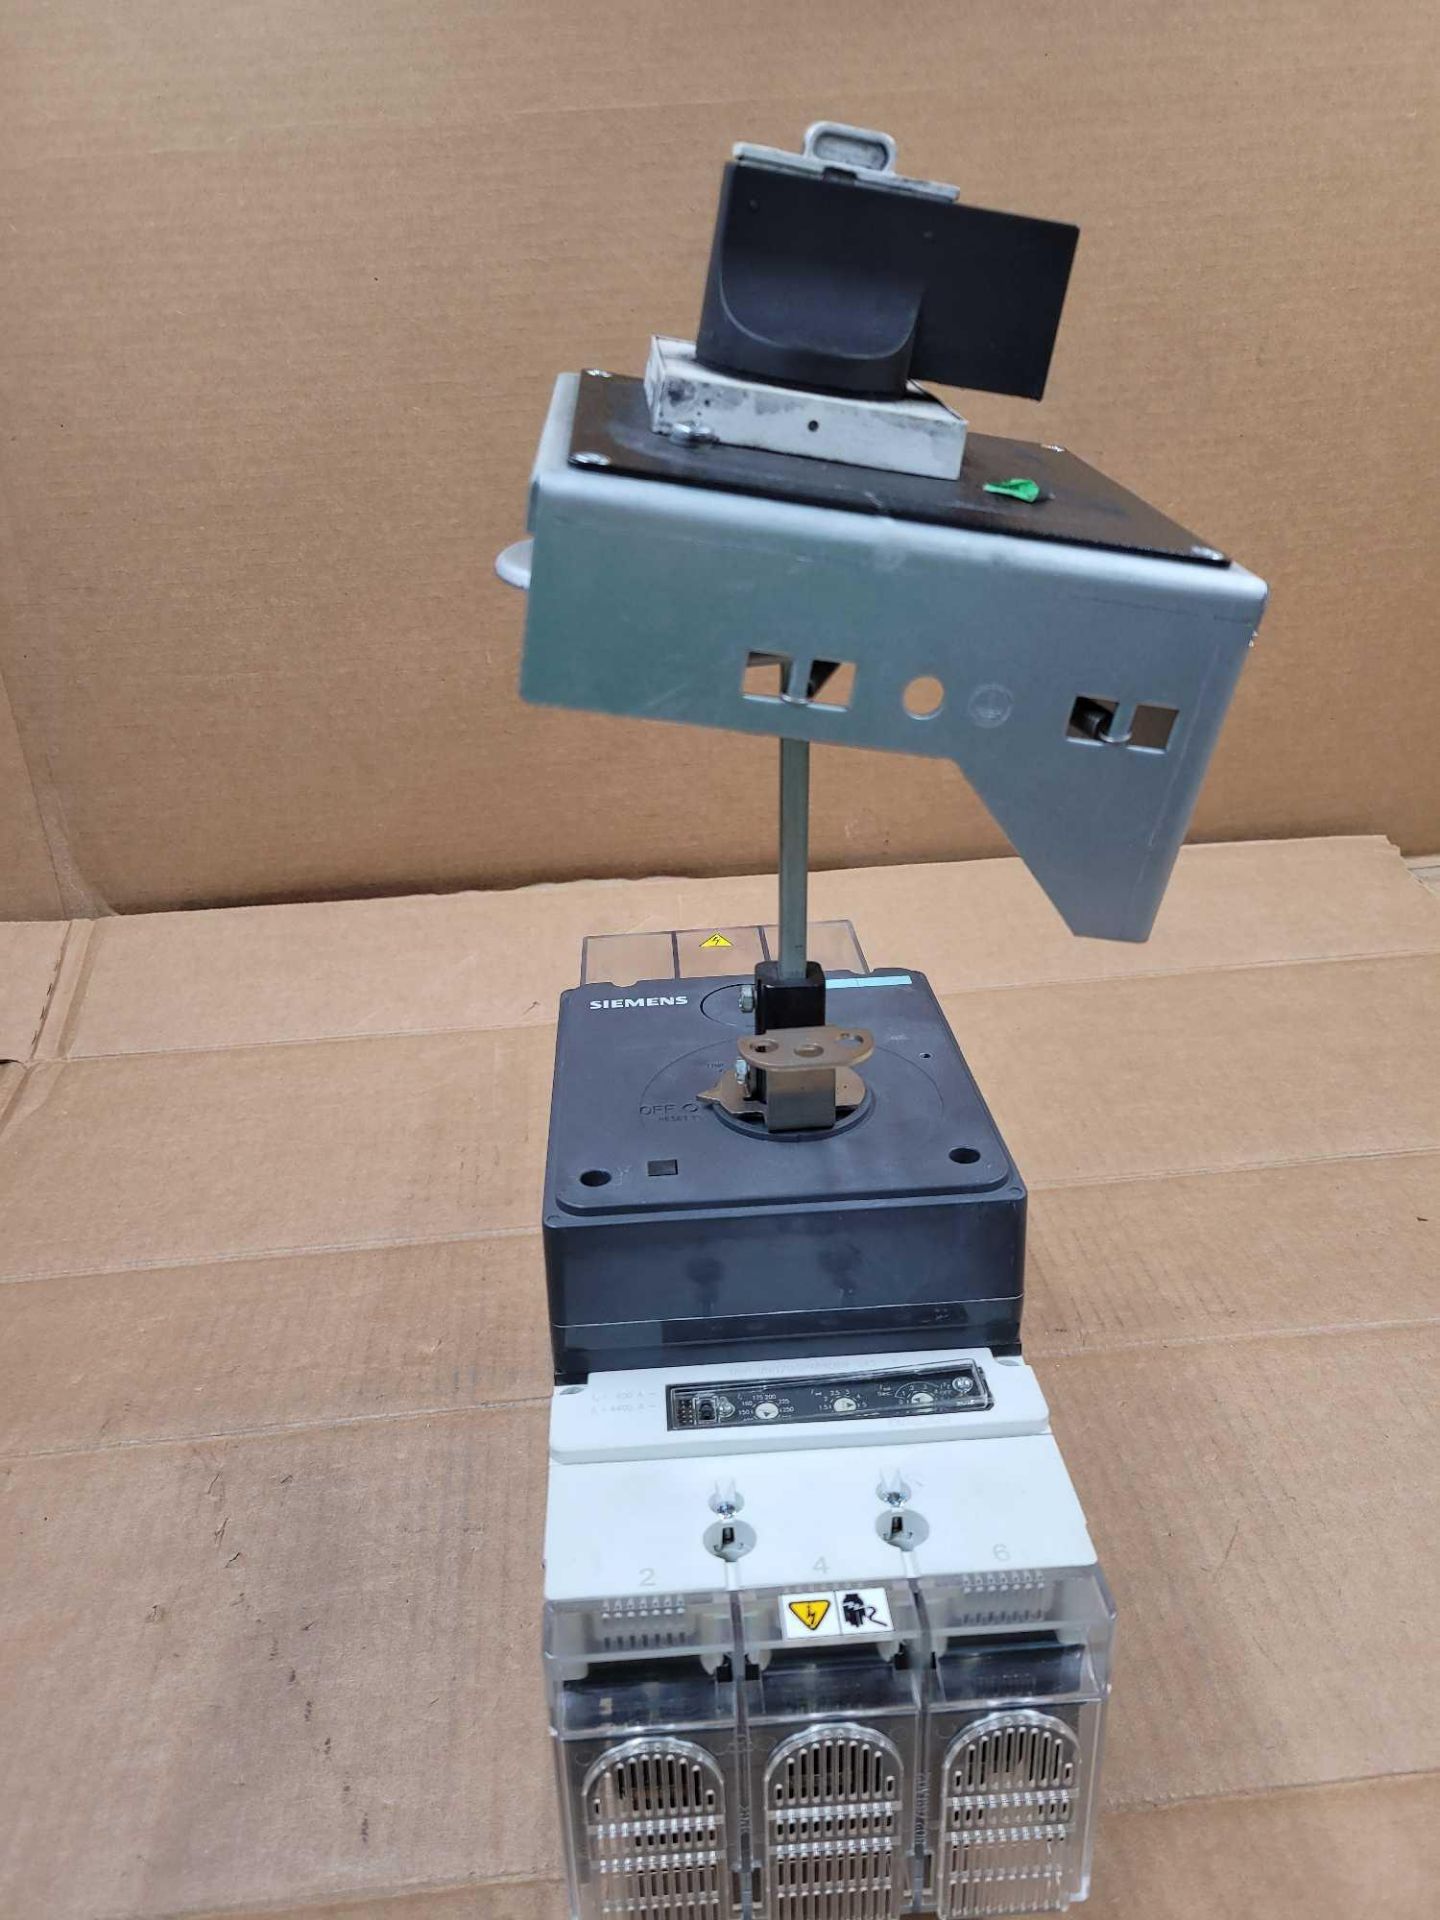 SIEMENS HJX3P400 with 3VL9400-3HE01 / 400 Amp Circuit Breaker with Rotary Operating Mechanism  /  Lo